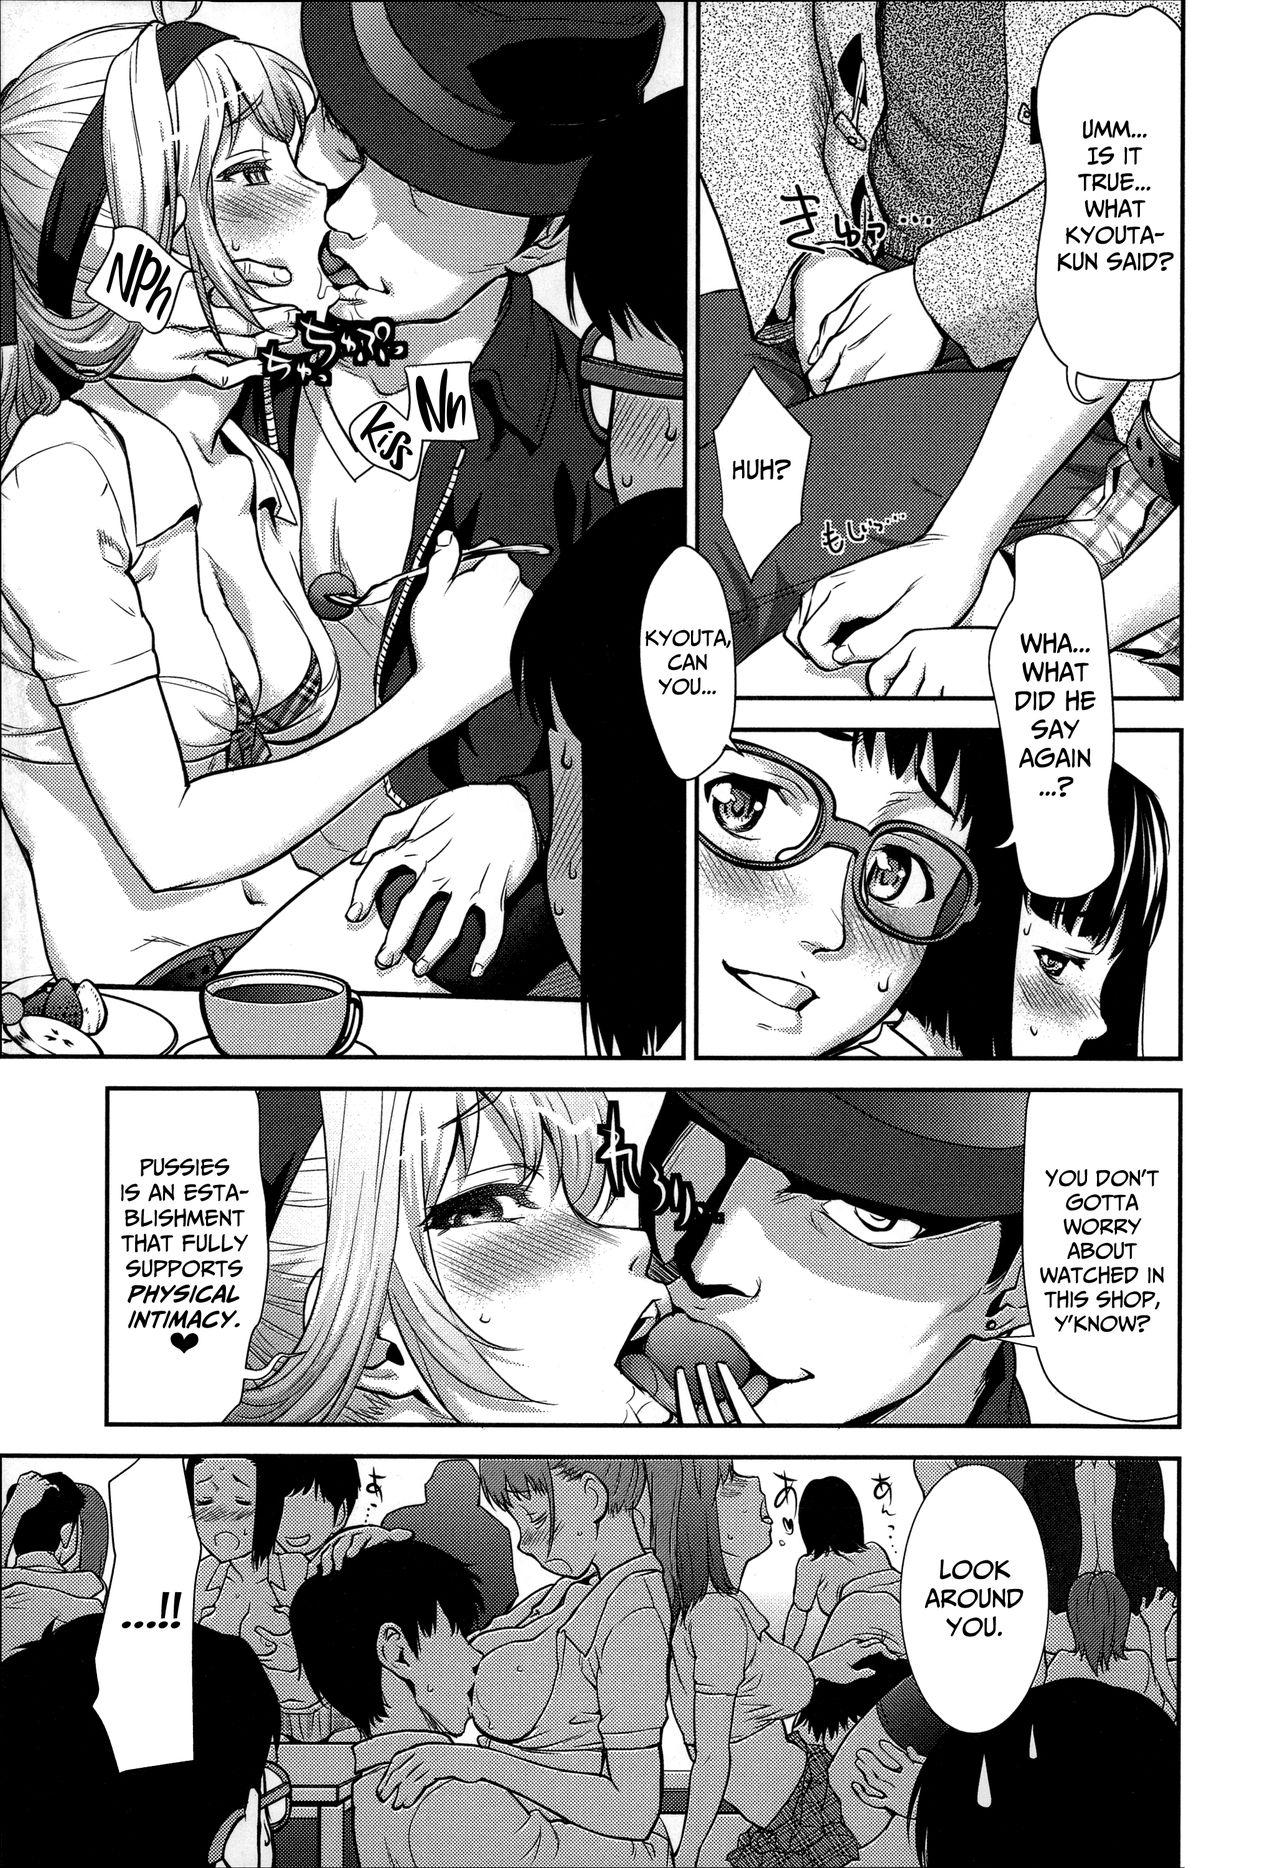 Woman Fucking Pussies e Youkoso! | Welcome to Pussies! Sexo Anal - Page 7